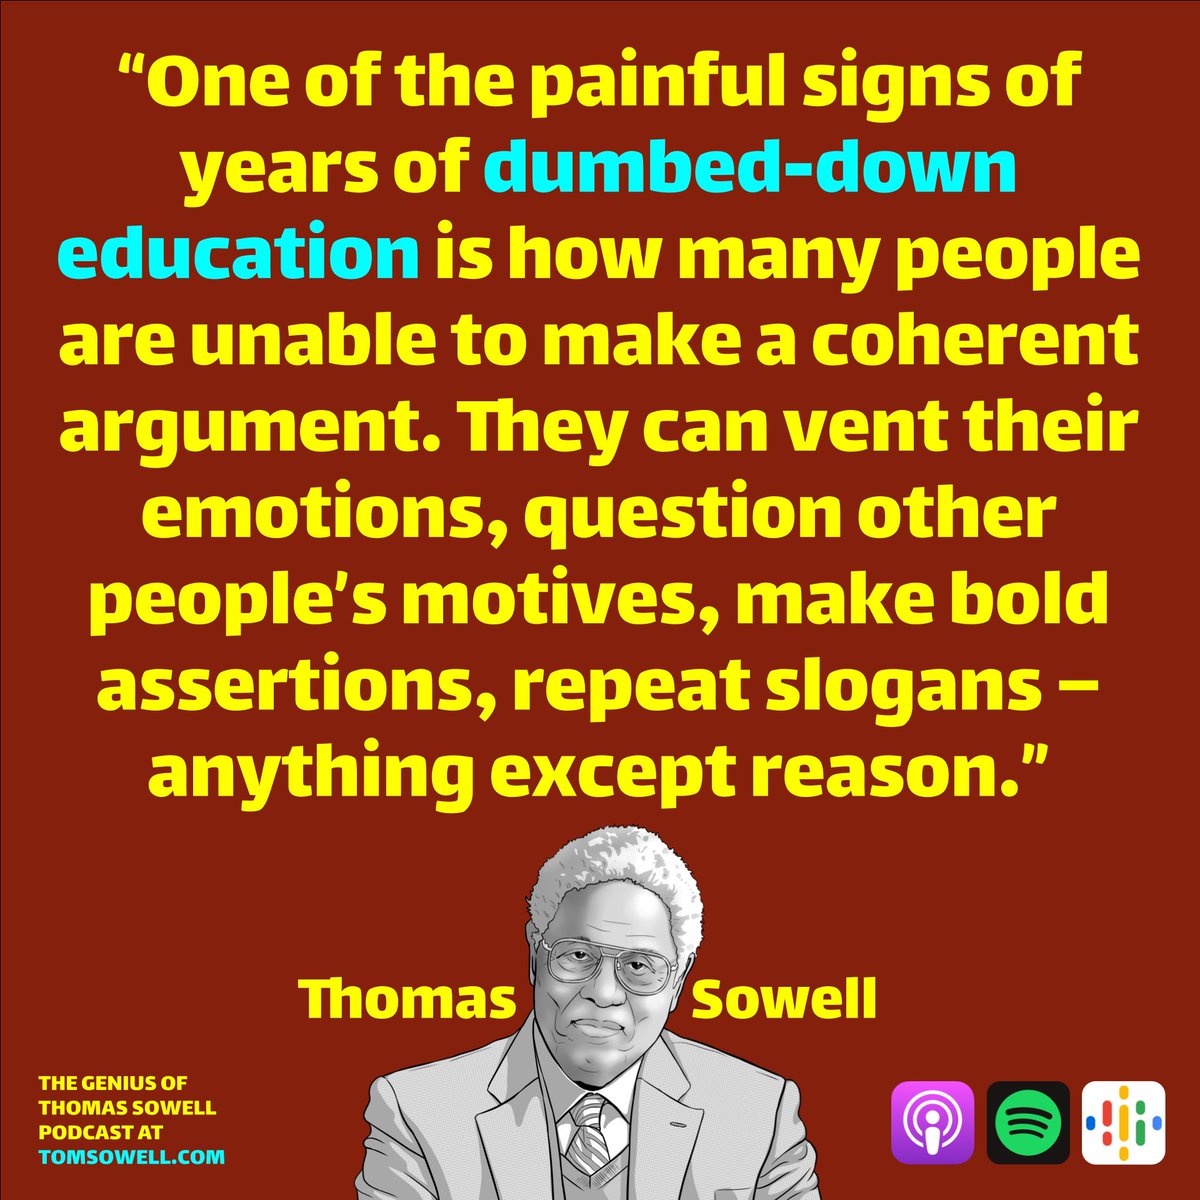 Thomas Sowell, The Genius of... (@AlanWolan) on Twitter photo 2023-06-25 18:11:00